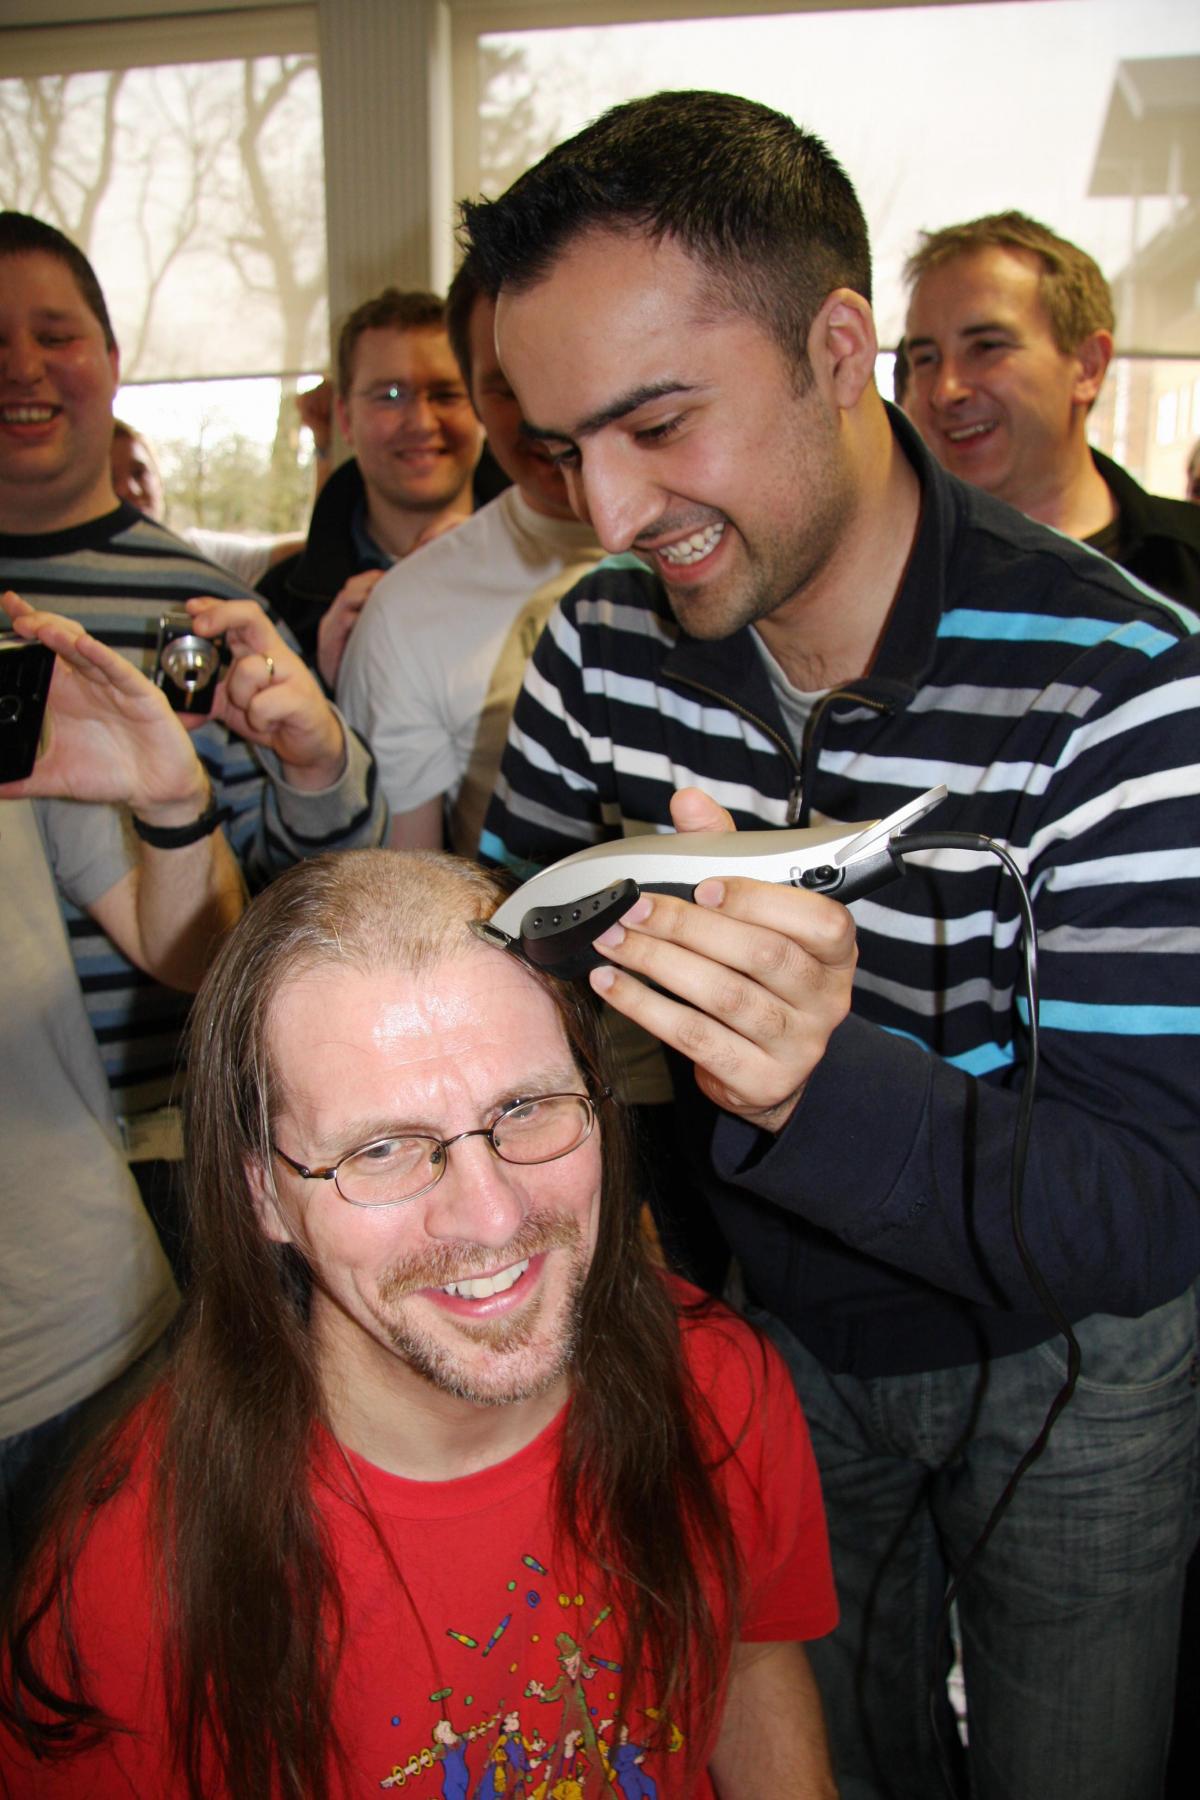 YBS staff member Paul Davies had his long locks shaved by Saheem Rashid for Red Nose Day.